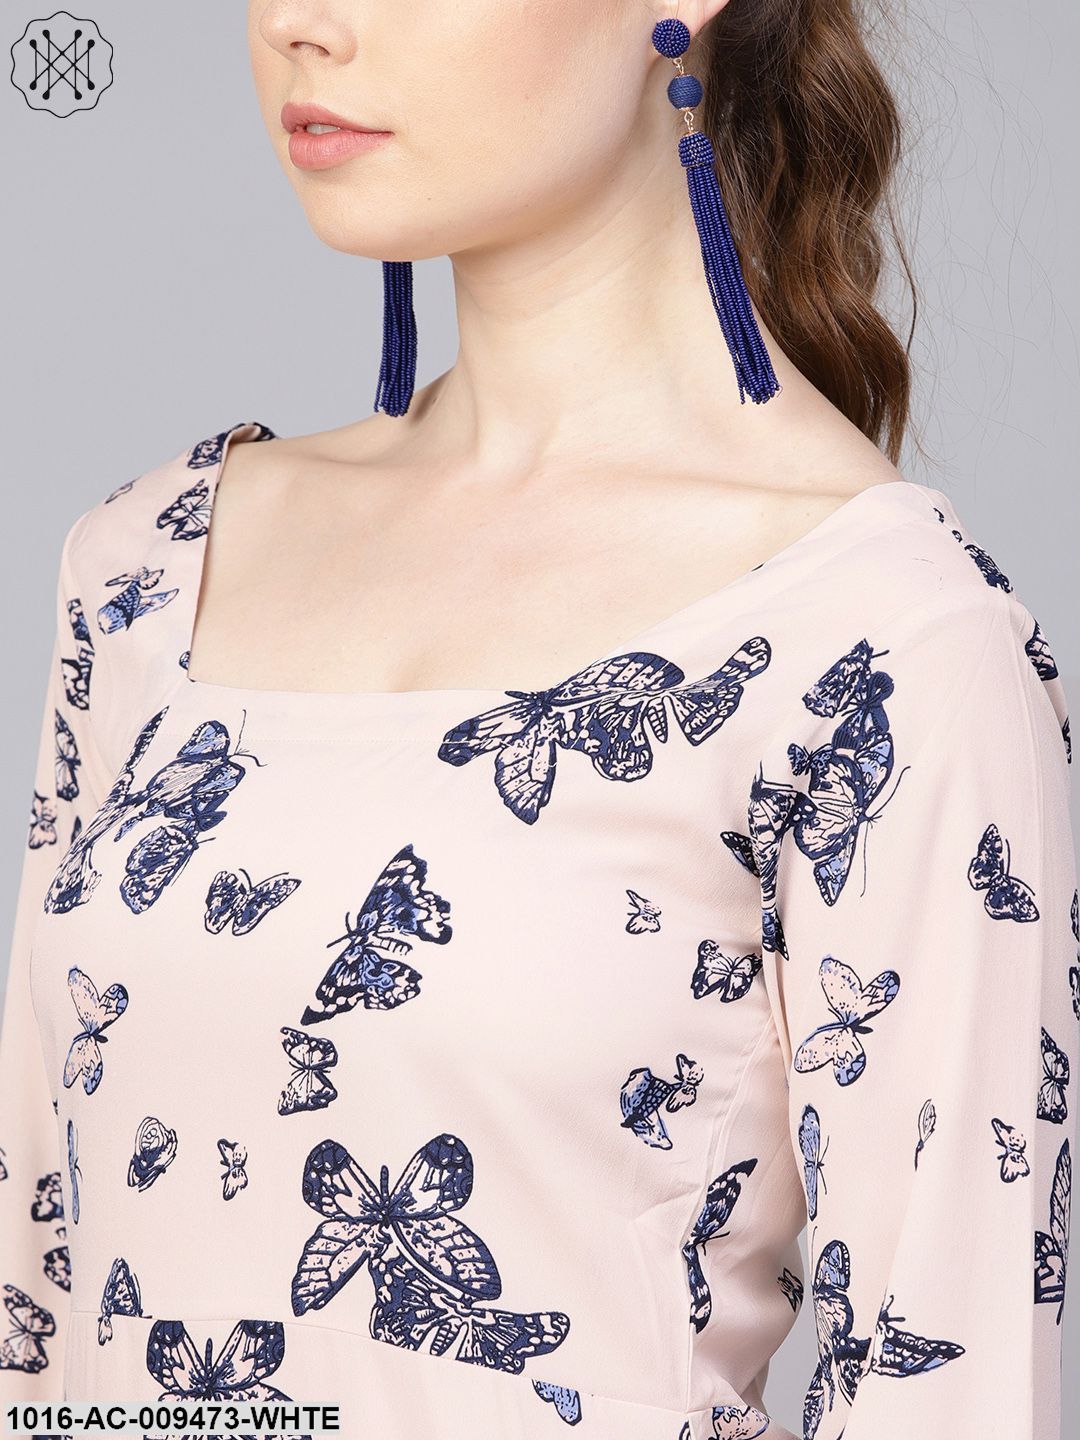 White Butterfly Printed Dress With Square Neck